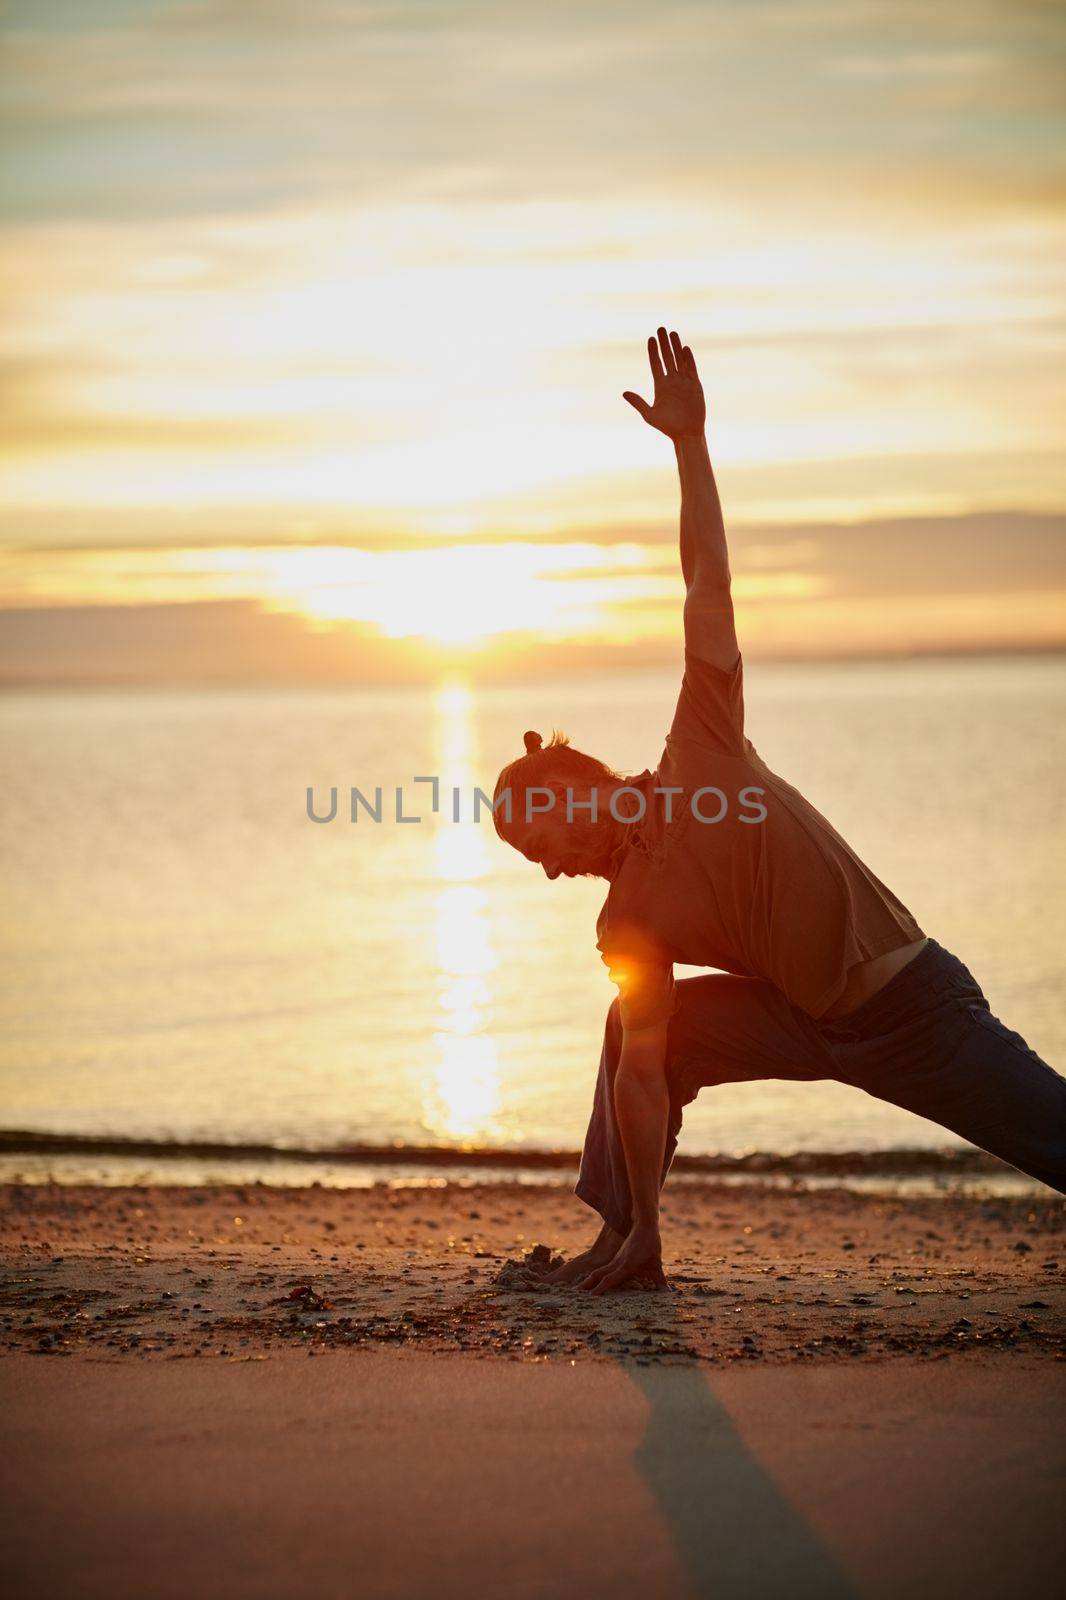 Nature is the perfect yoga partner. a man practicing the triangle pose during his yoga routine at the beach